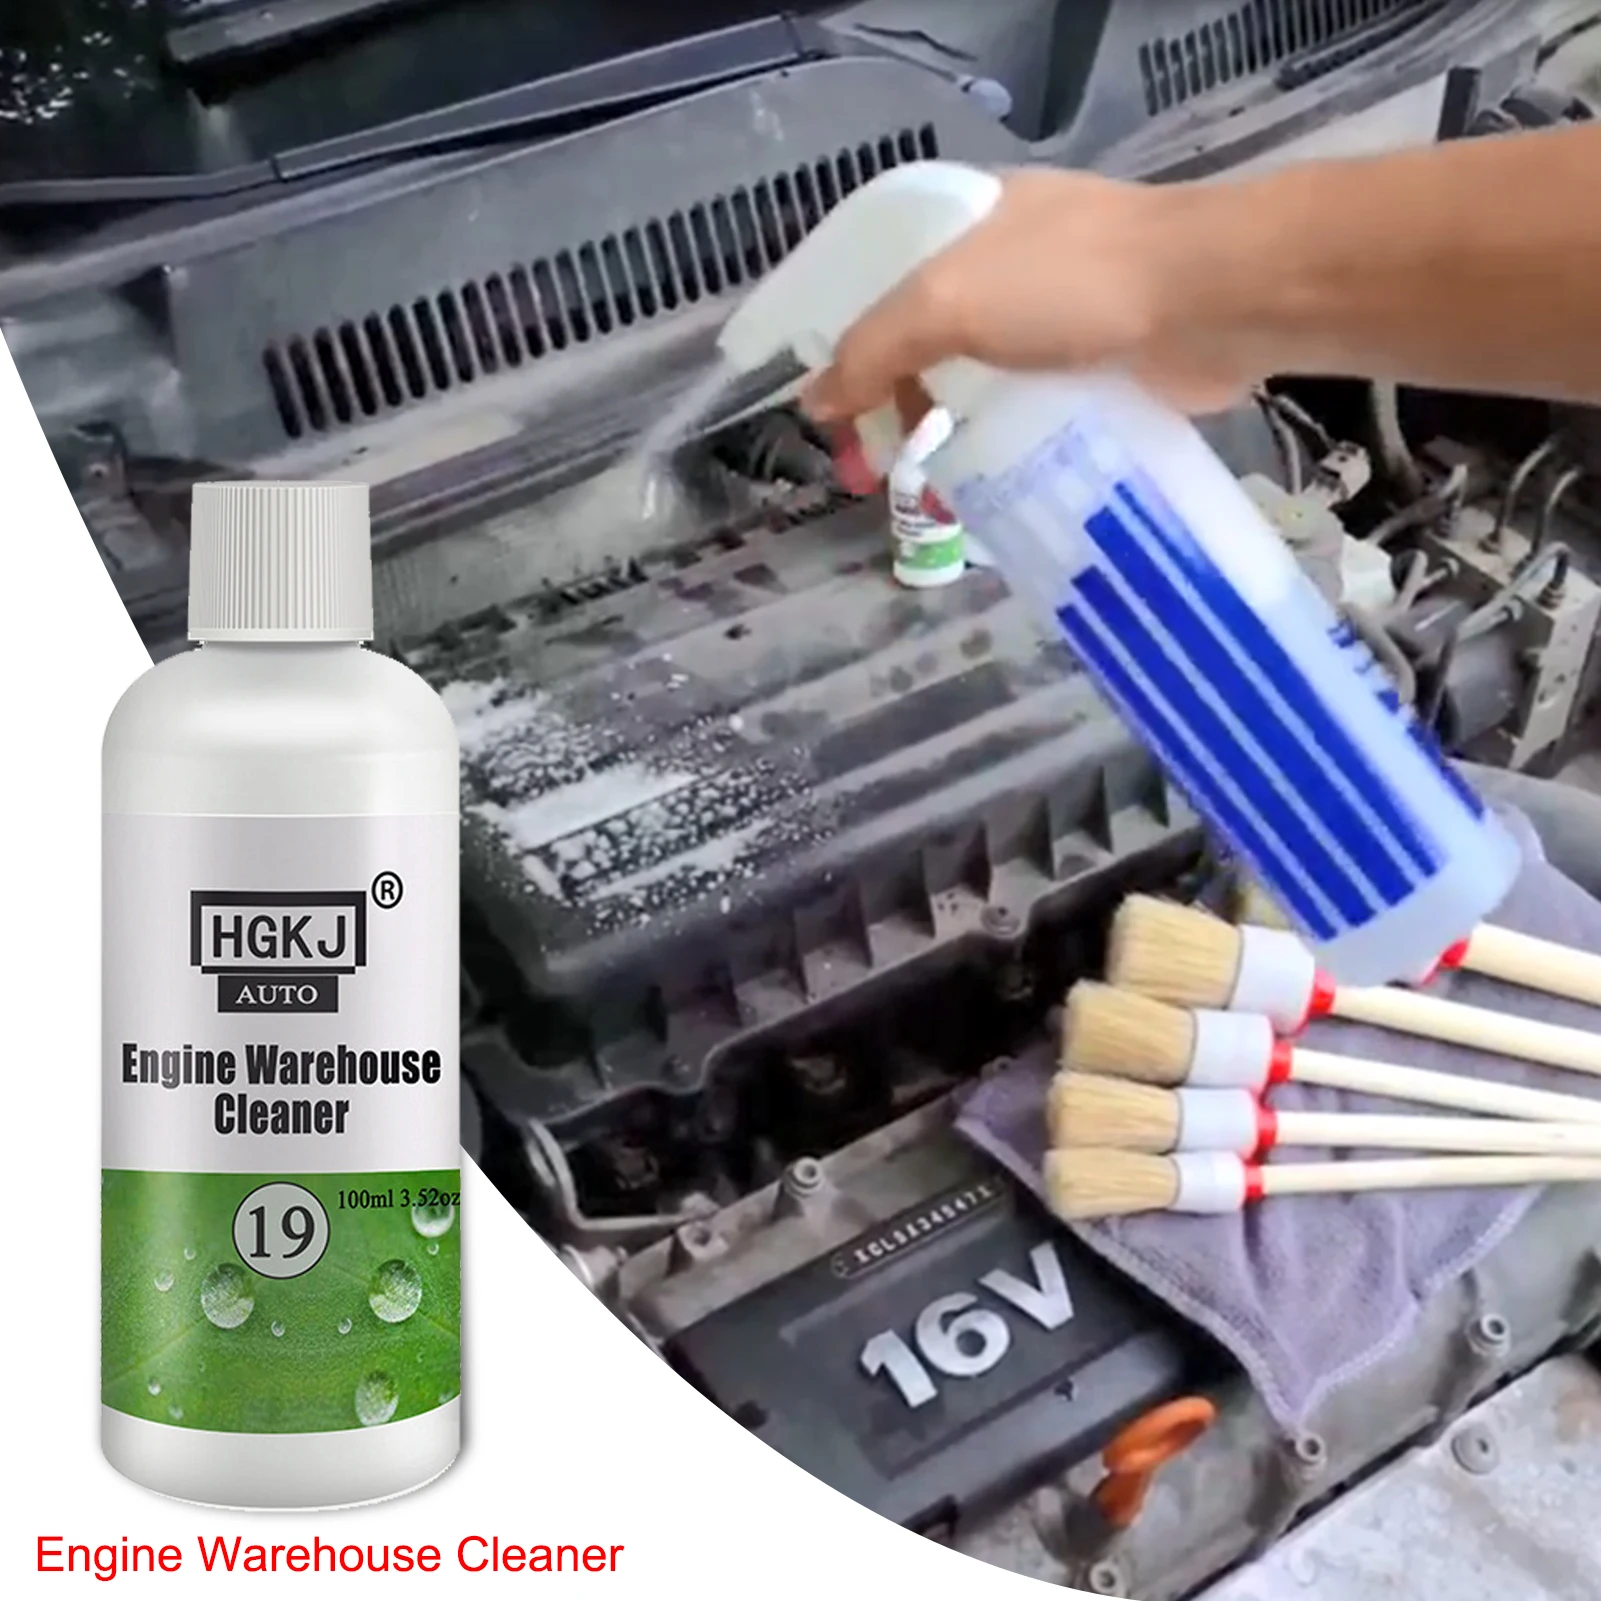 

HGKJ-AUTO-19 Car Engine Warehouse Cleaner | All Purpose Spray For Headlights On Oil Eater Multi-Surface Removes Dust Dirt